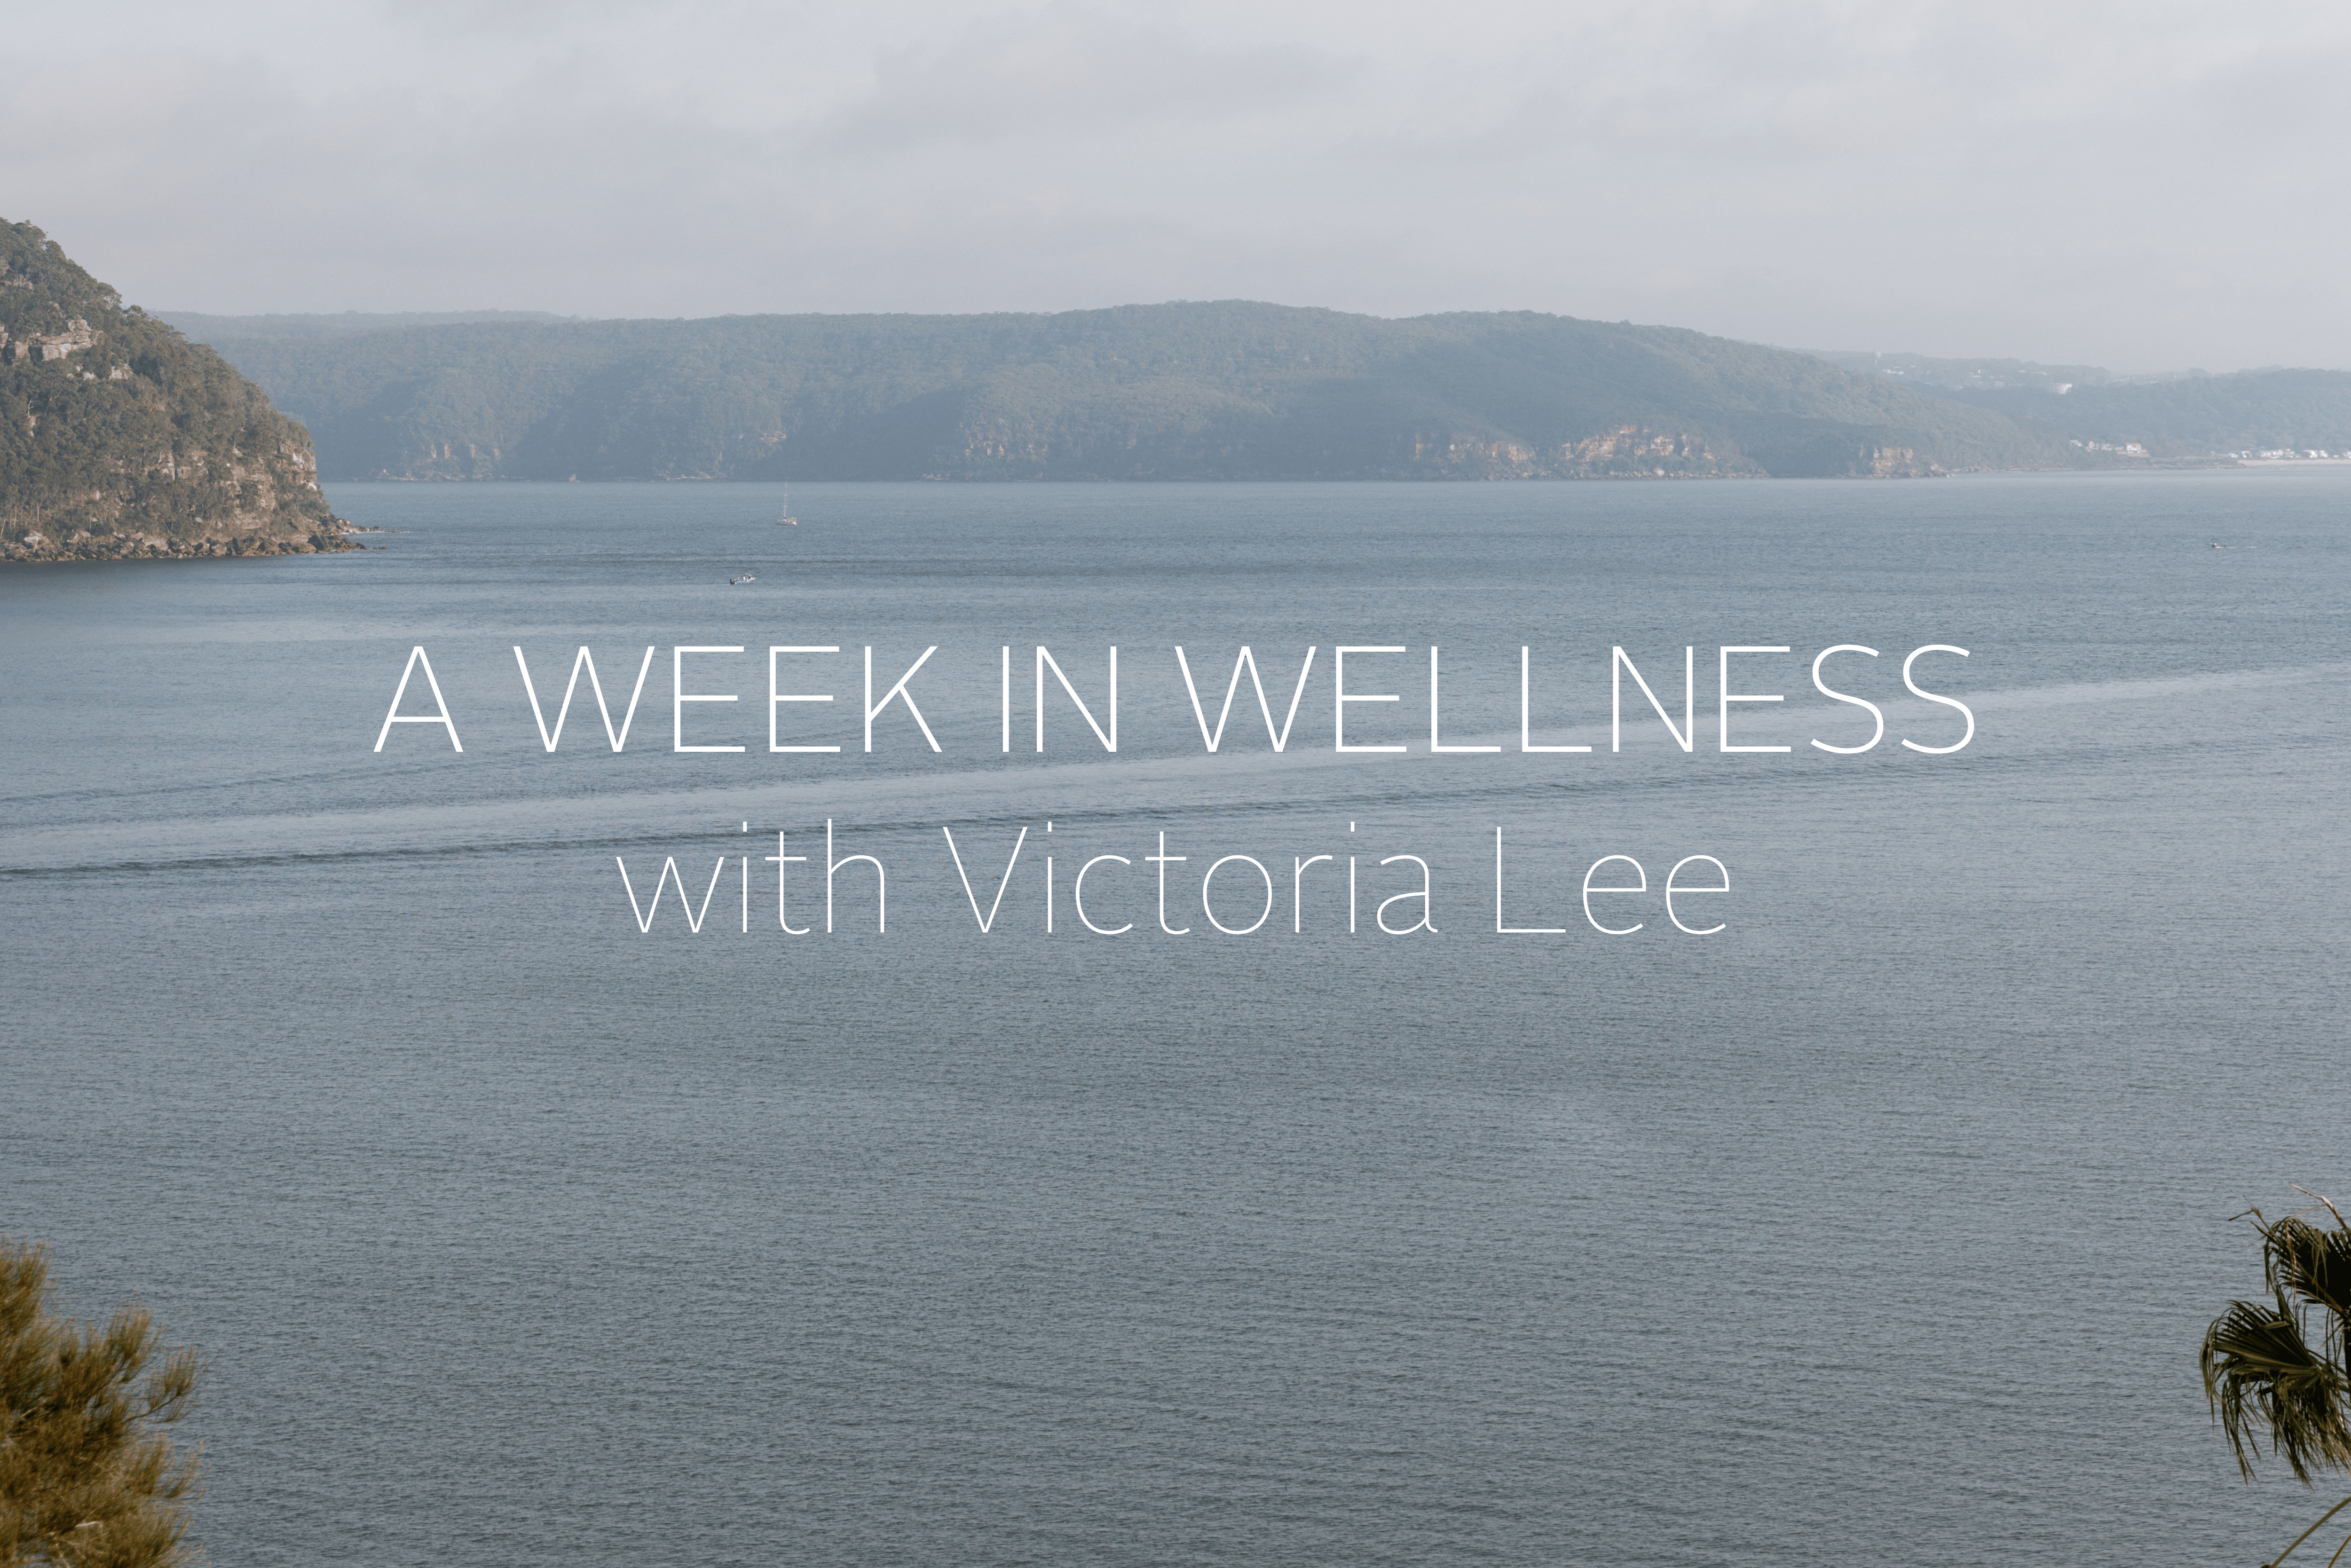 A WEEK IN WELLNESS with Victoria Lee